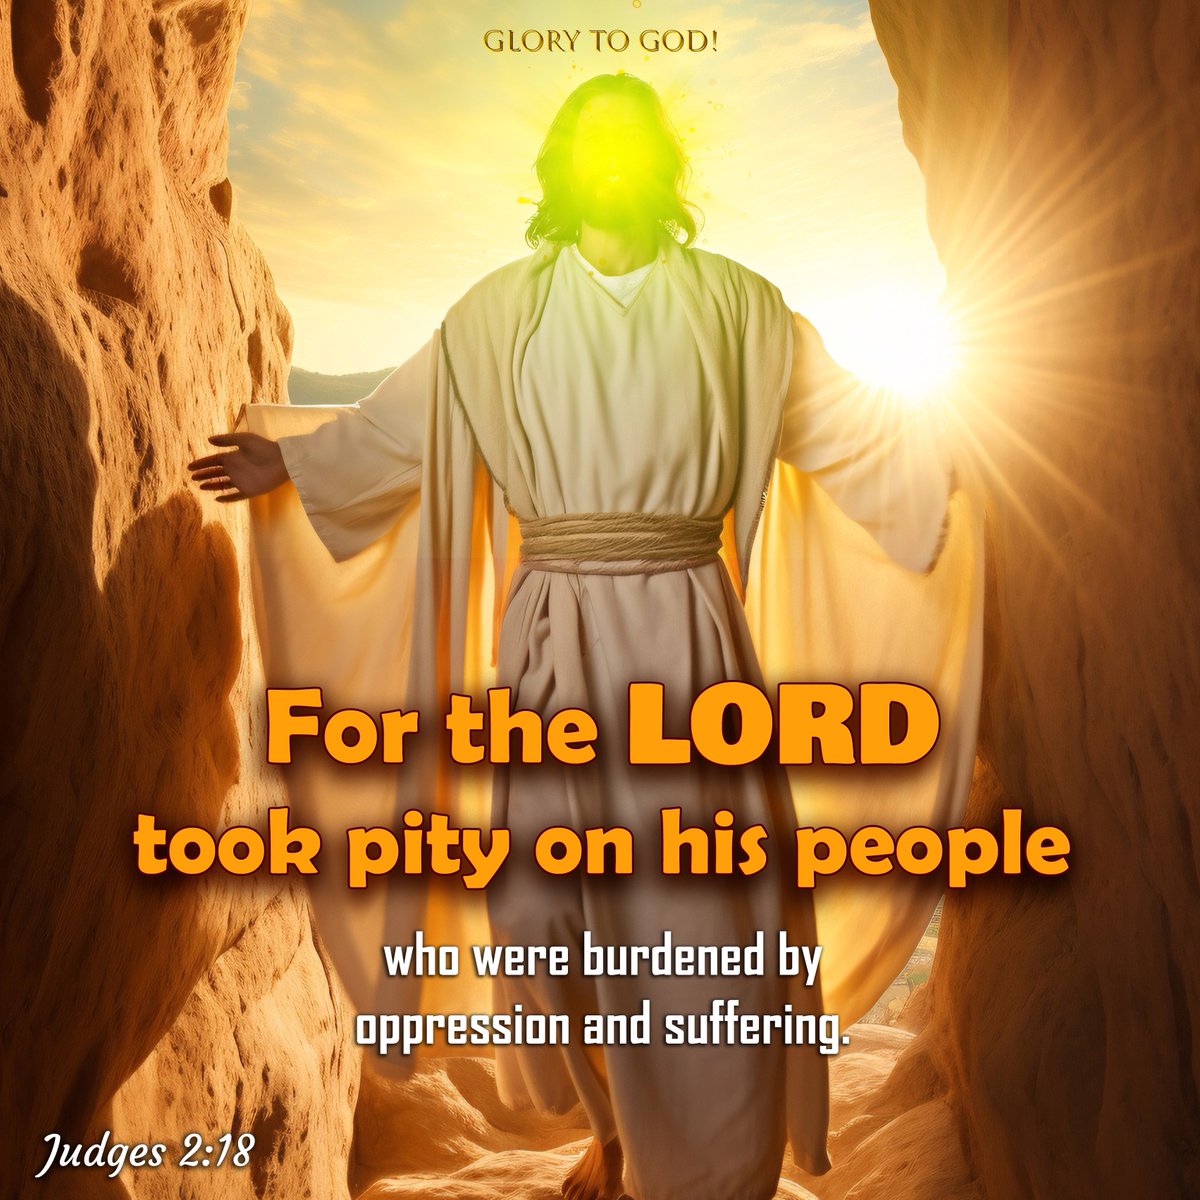 For the LORD took pity on his people, who were burdened by oppression and suffering.
Judges 2:18

#bibleverse #repentjesusiscoming #Bible #gospel #VerseOfTheDay #LORD #God